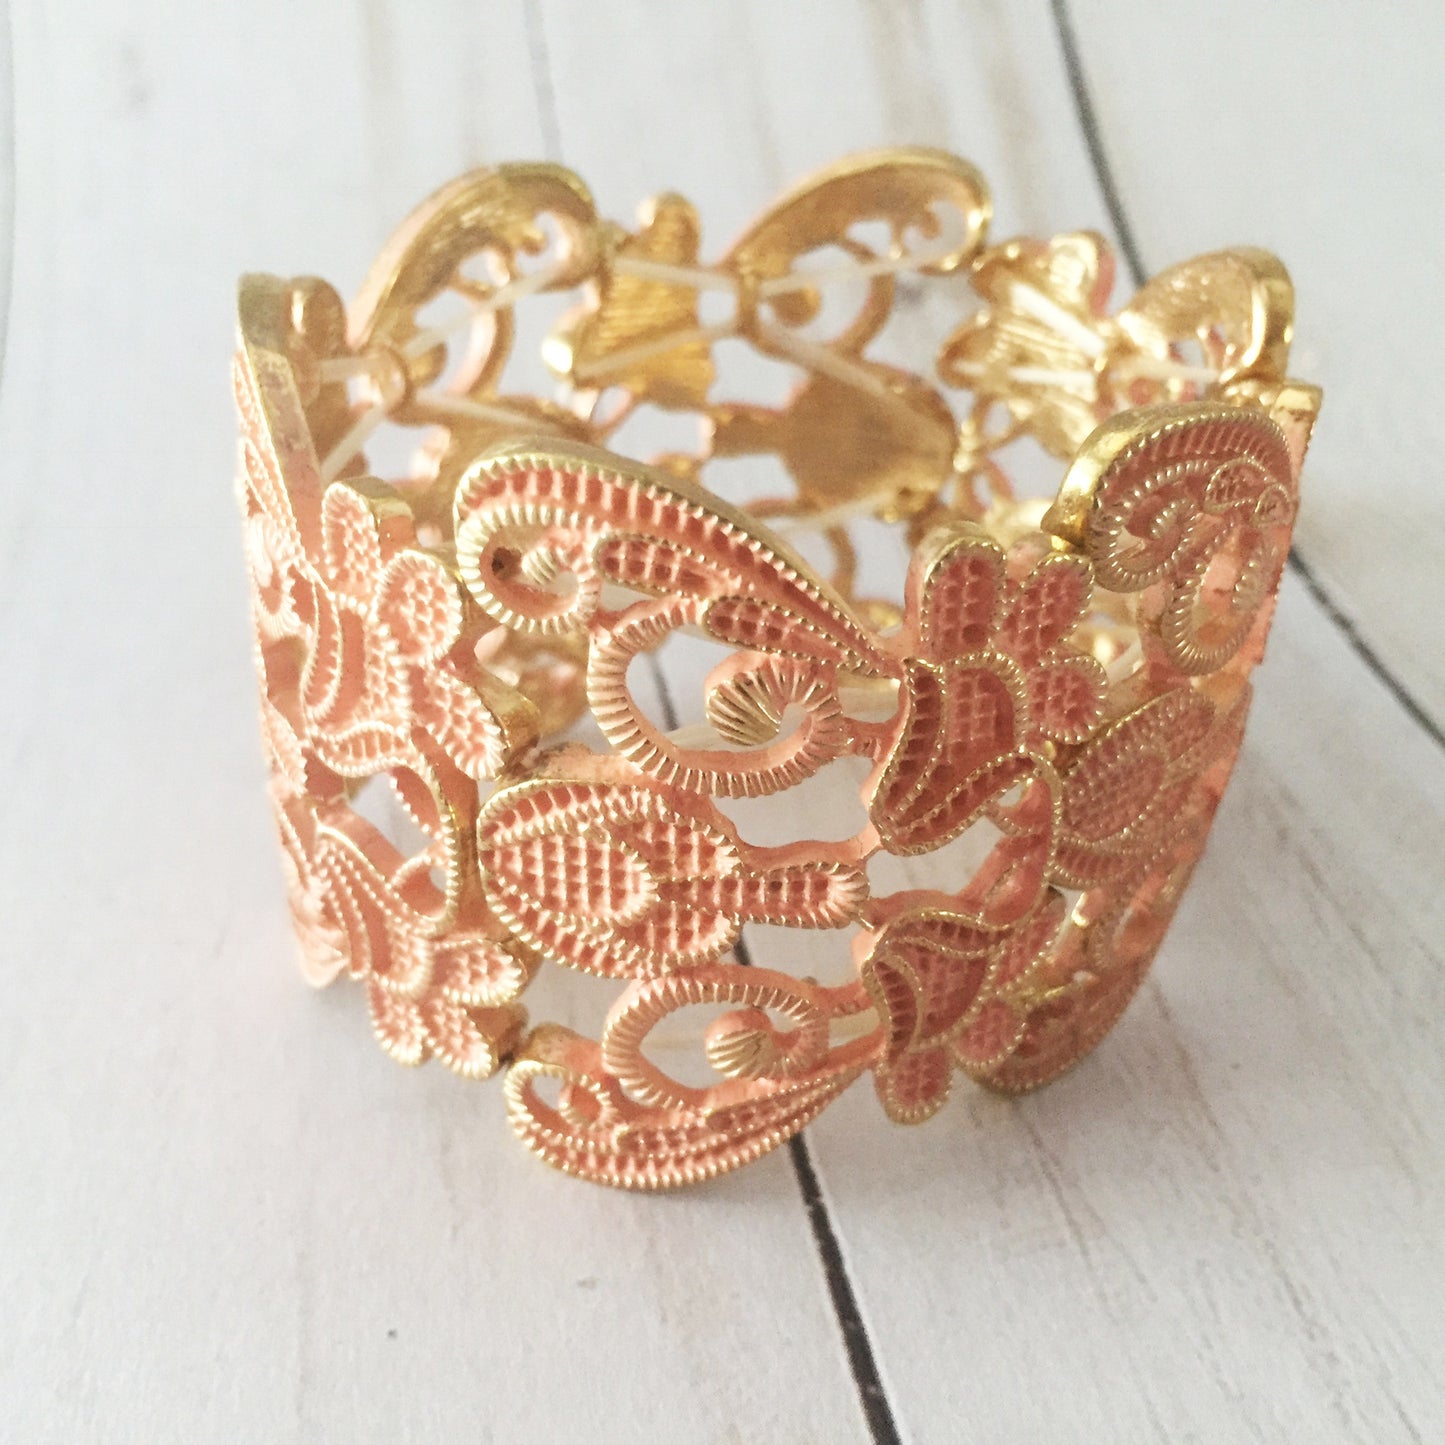 Lace Filigree Bracelet ~ Peach and Gold